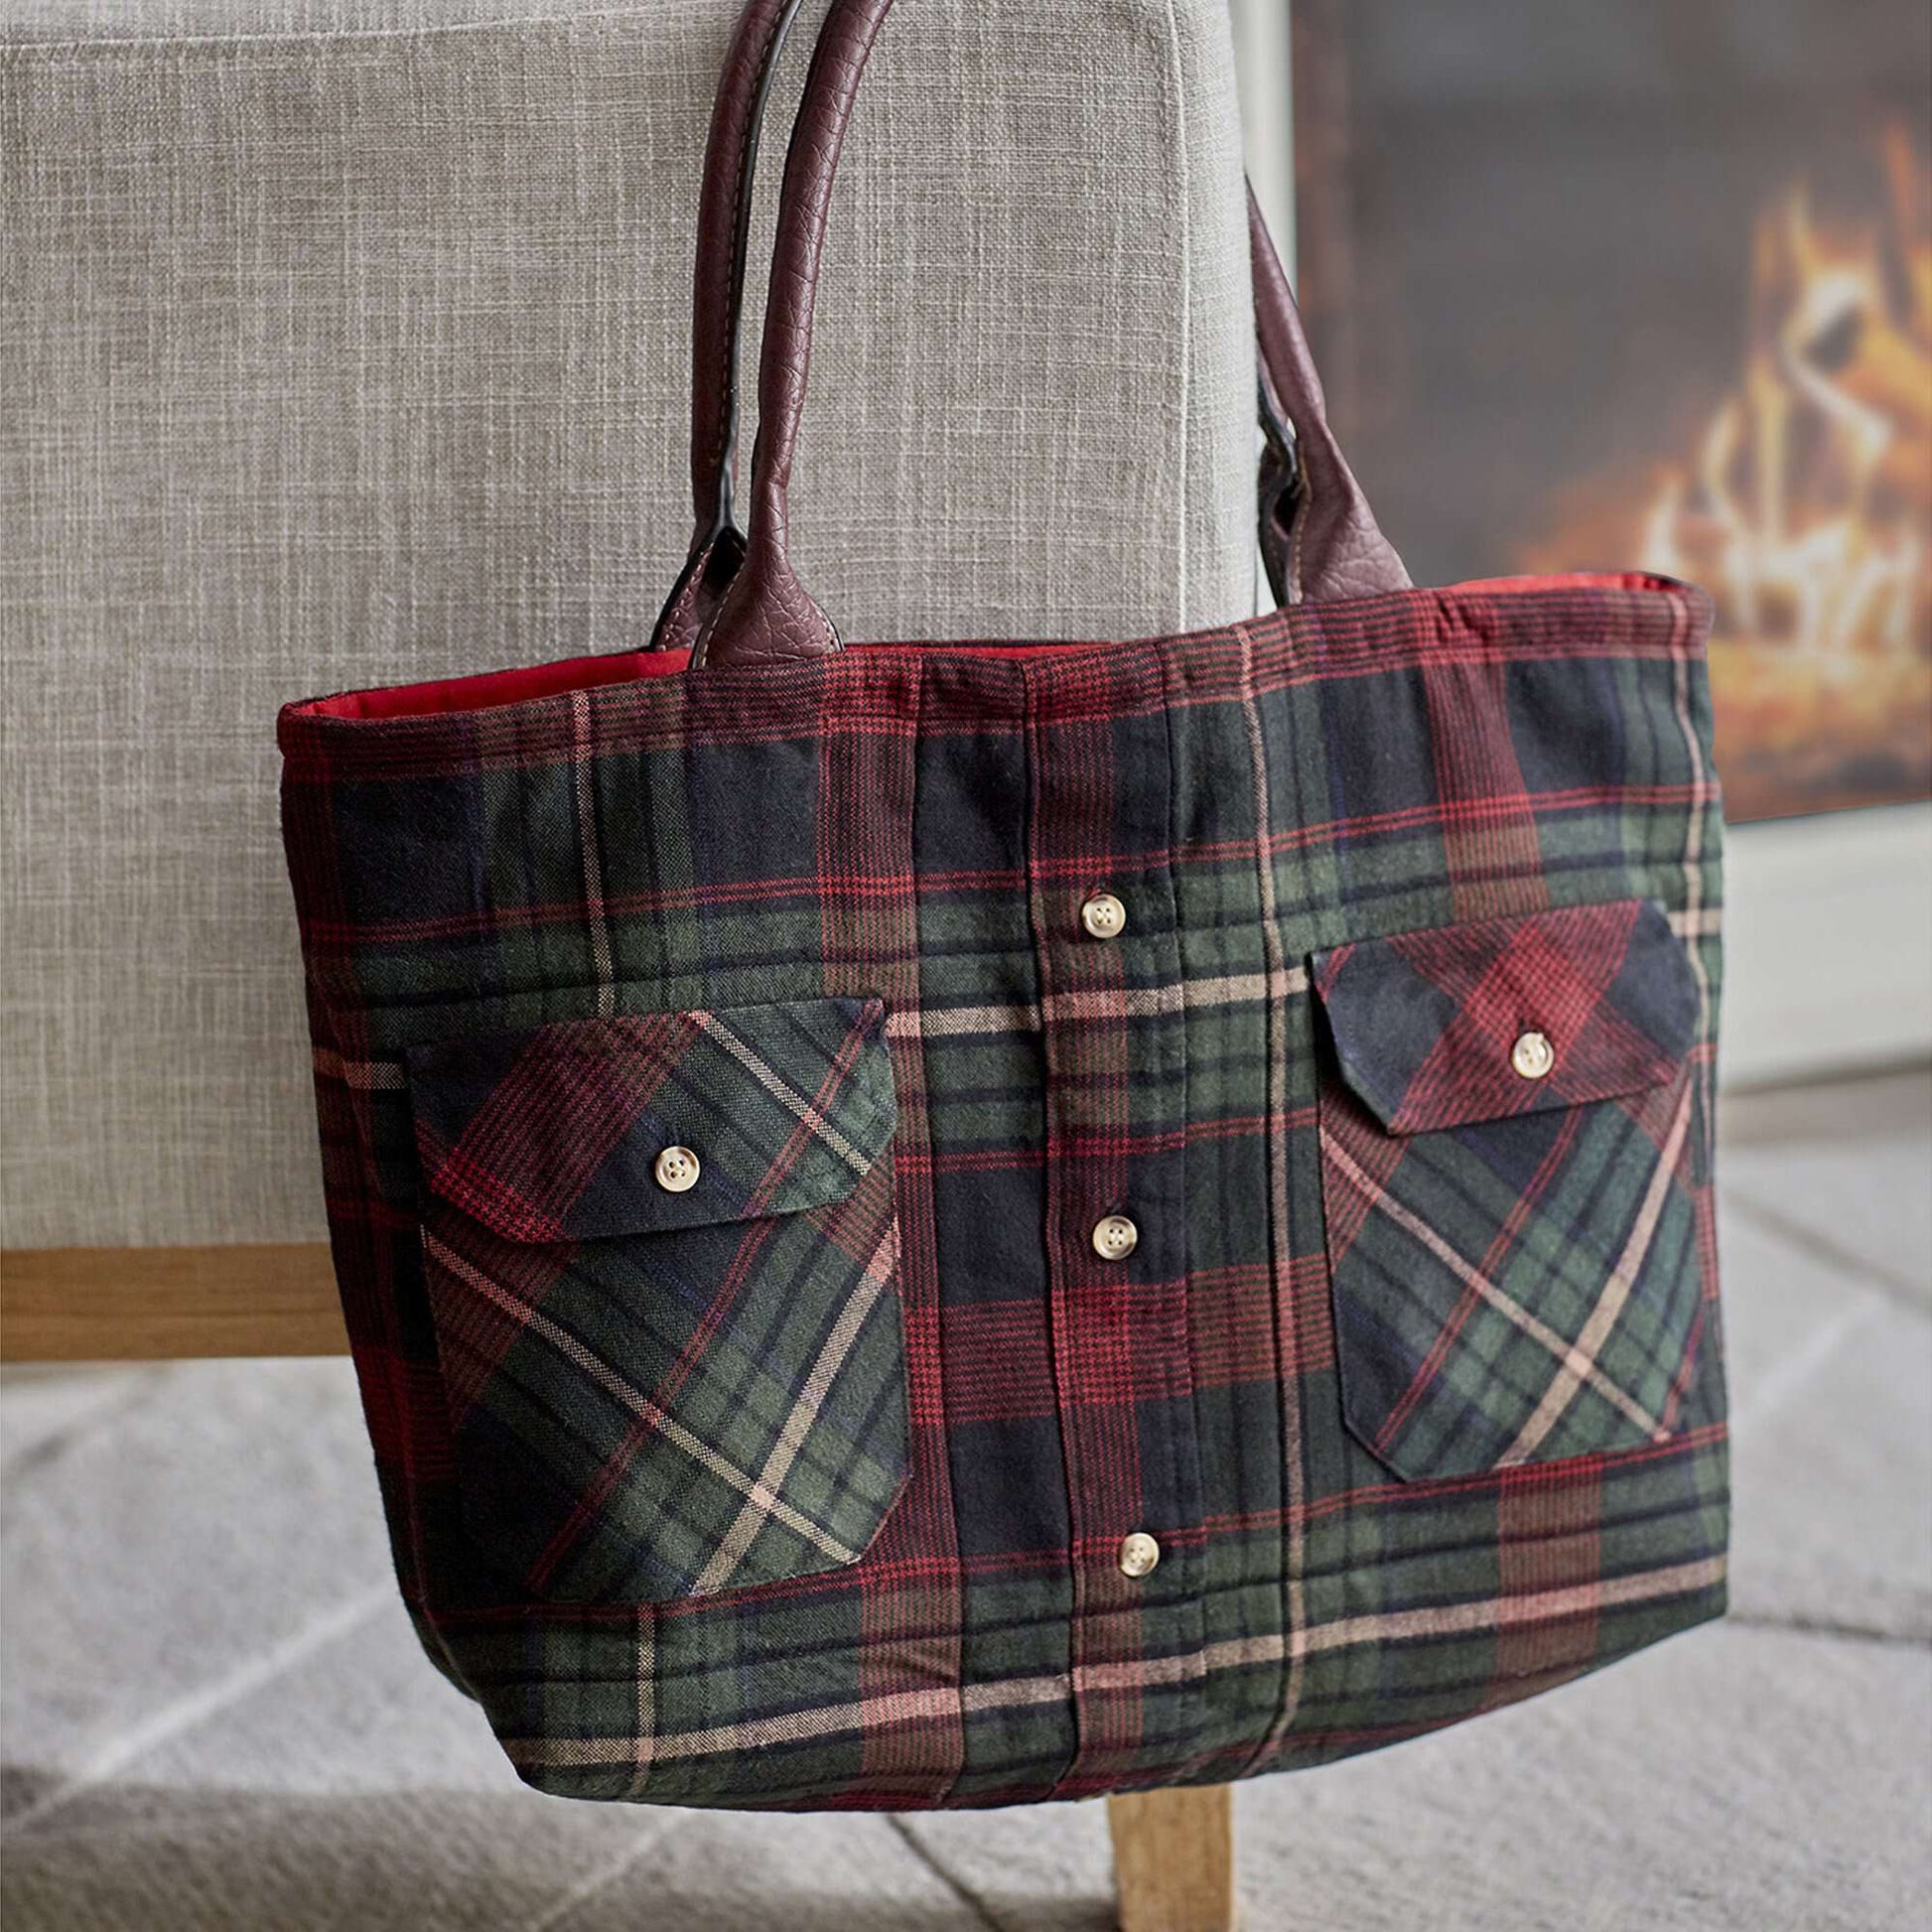 Free Coats & Clark Shirt Tale Tote -Re-purpose a Flannel Shirt Sewing Pattern